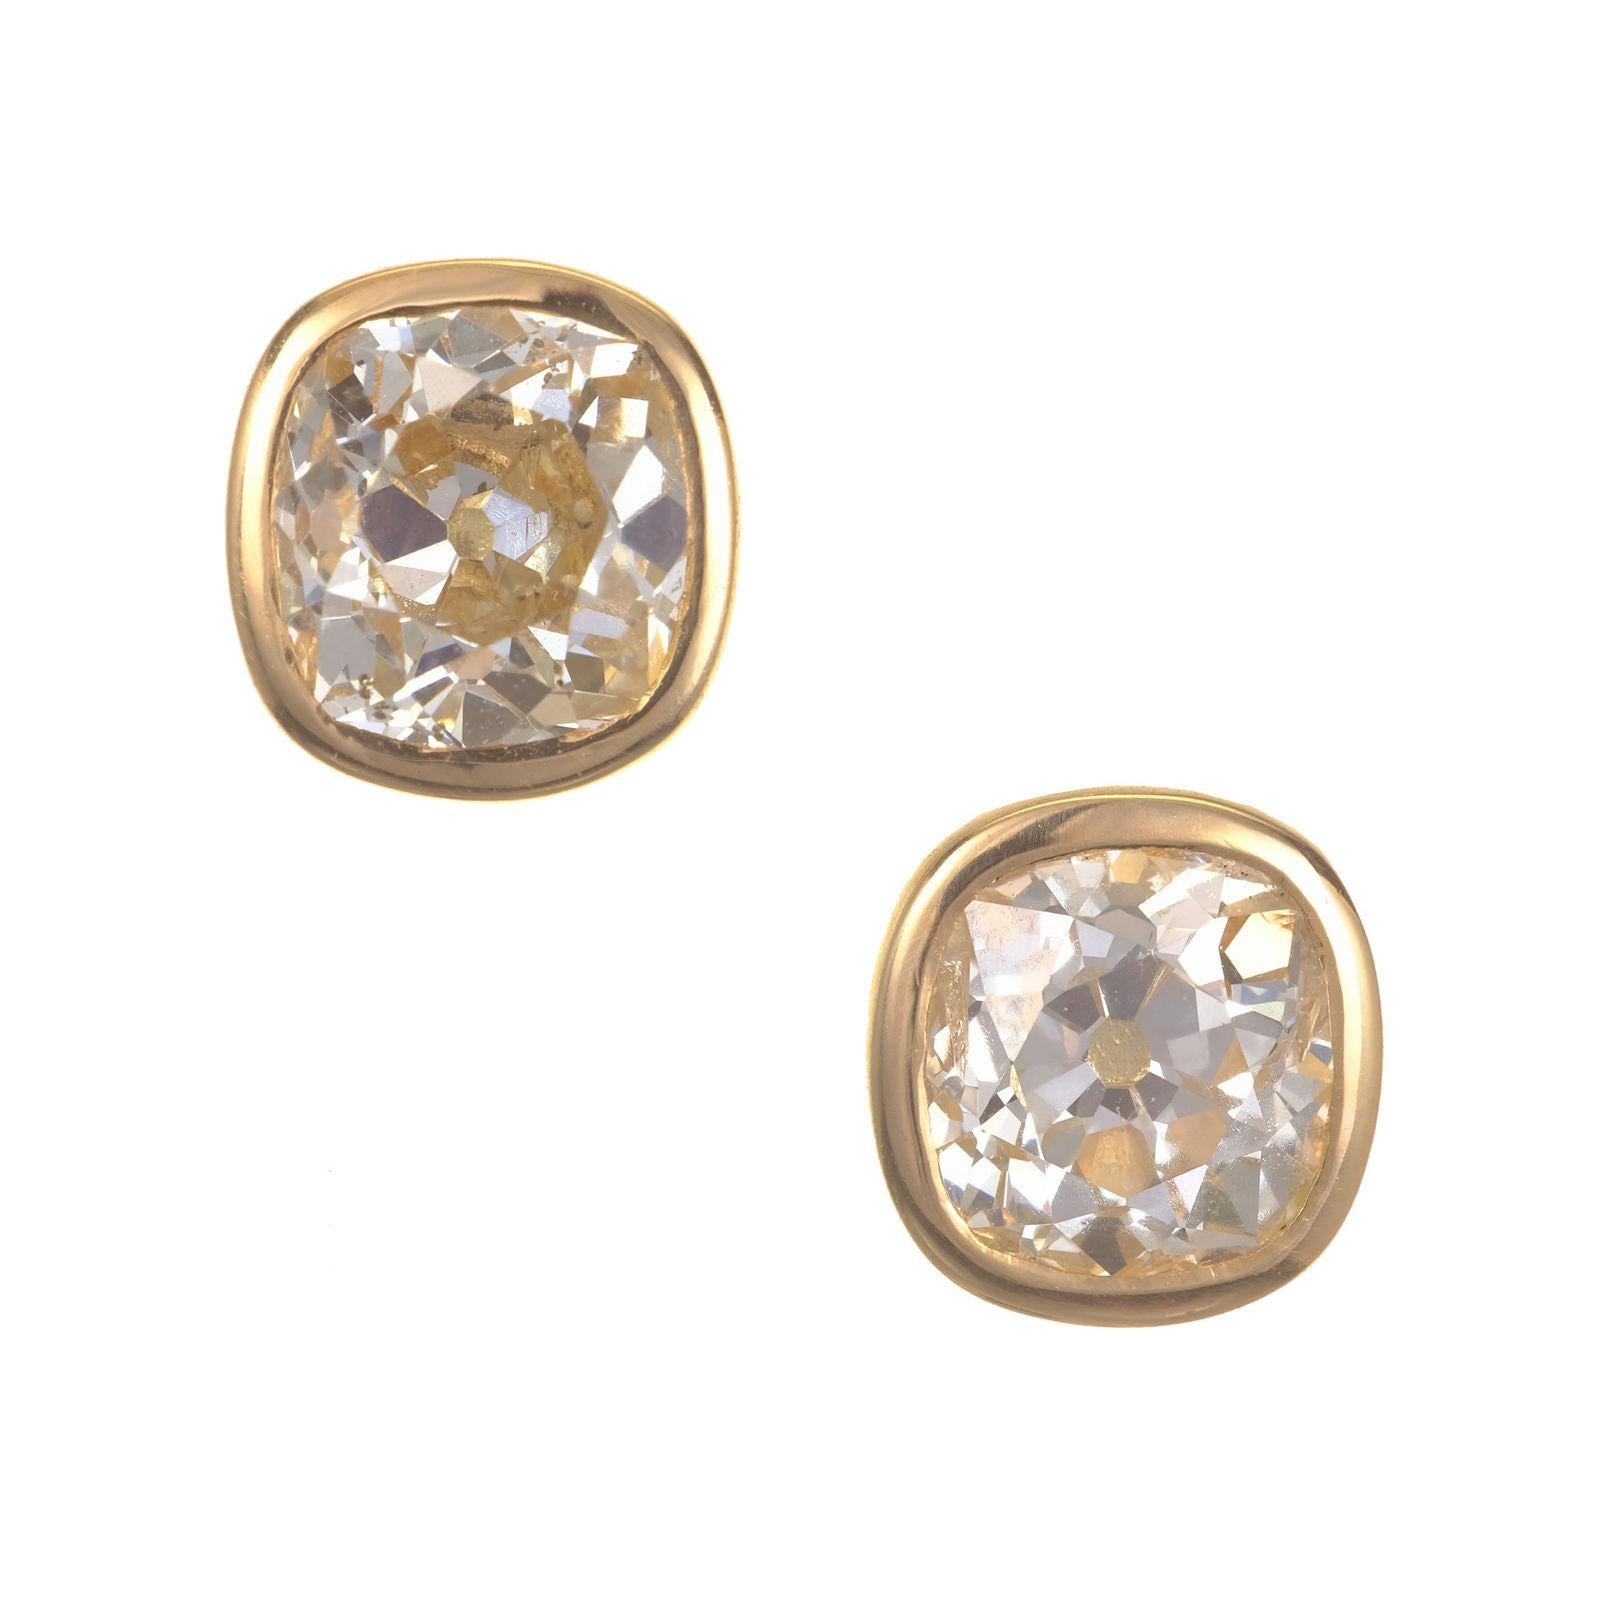 Old mine brilliant cut diamond stud earrings. 2 Old mine cut diamonds totaling 2.91cts, bezel tube set in 18k yellow gold settings. EGL has graded them as faint to very light yellow color. 

1 Old Mine Cut Diamond Approx. Total Weight 1.46 carats